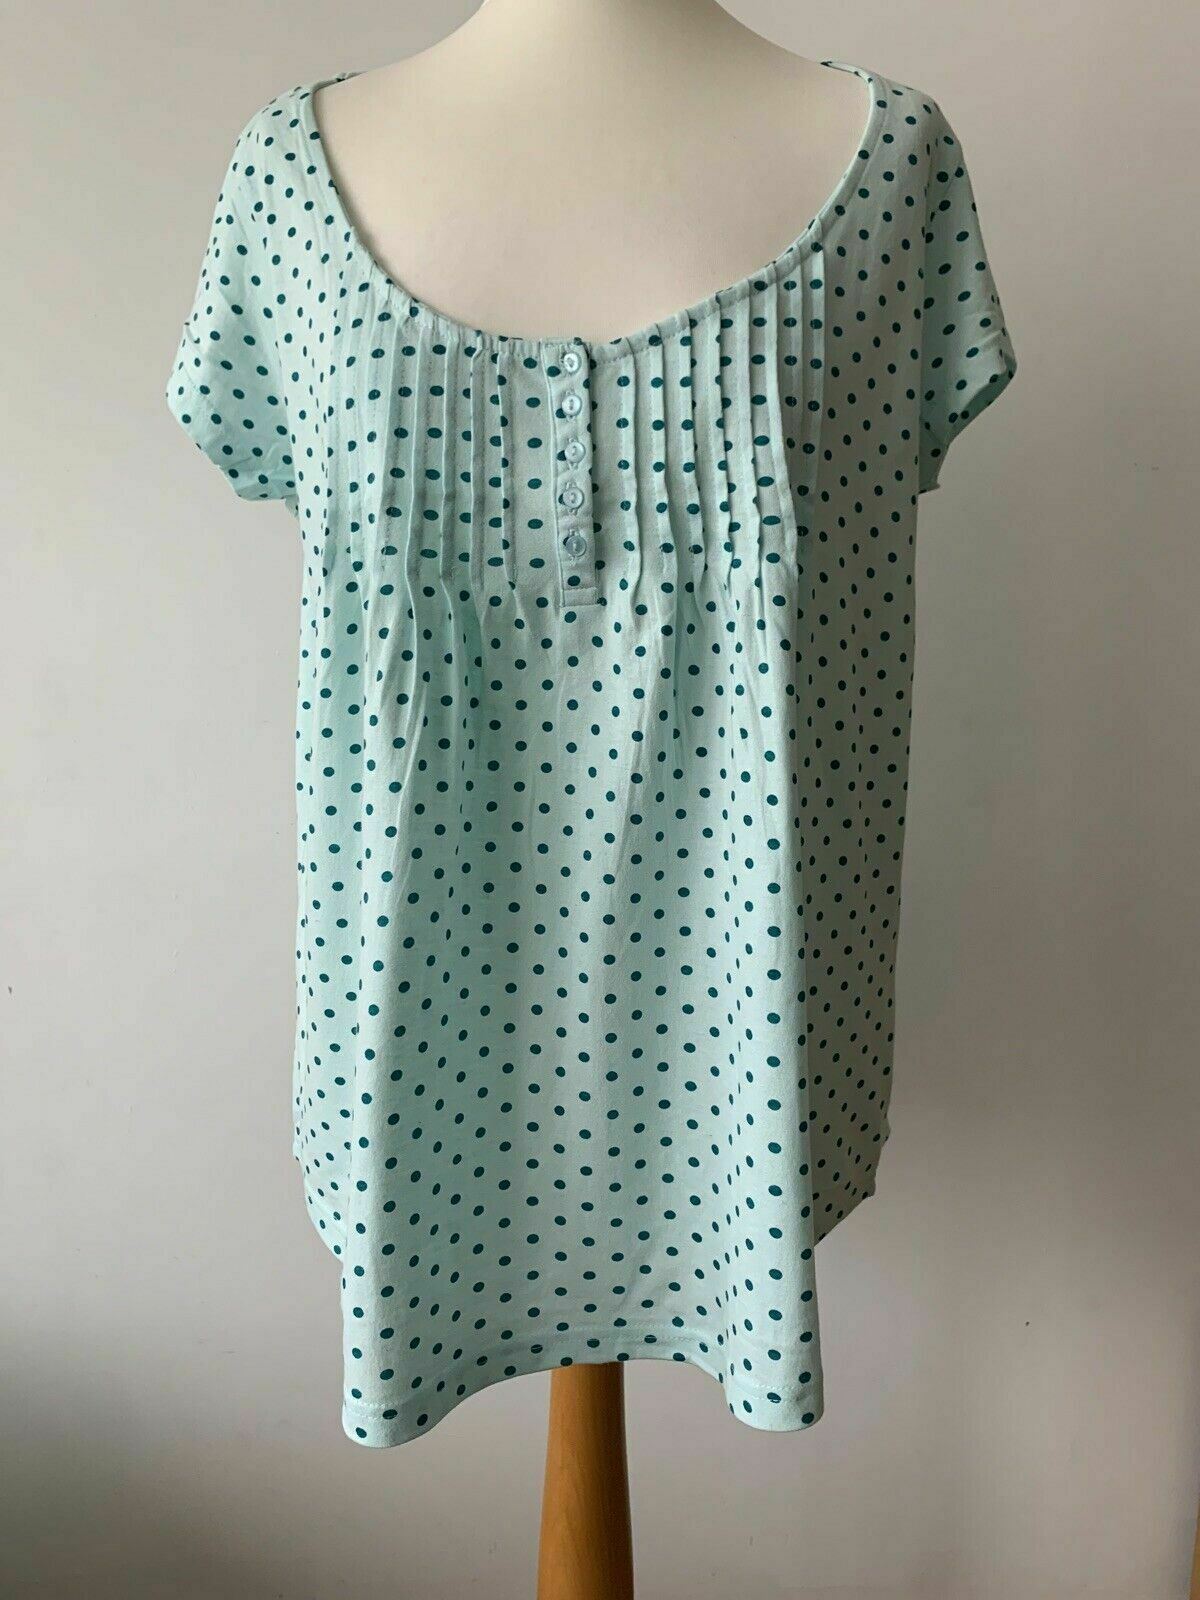 Blancheporte Light Teal Polka Dot Top Cotton Size 20 pit to pit 21.5"